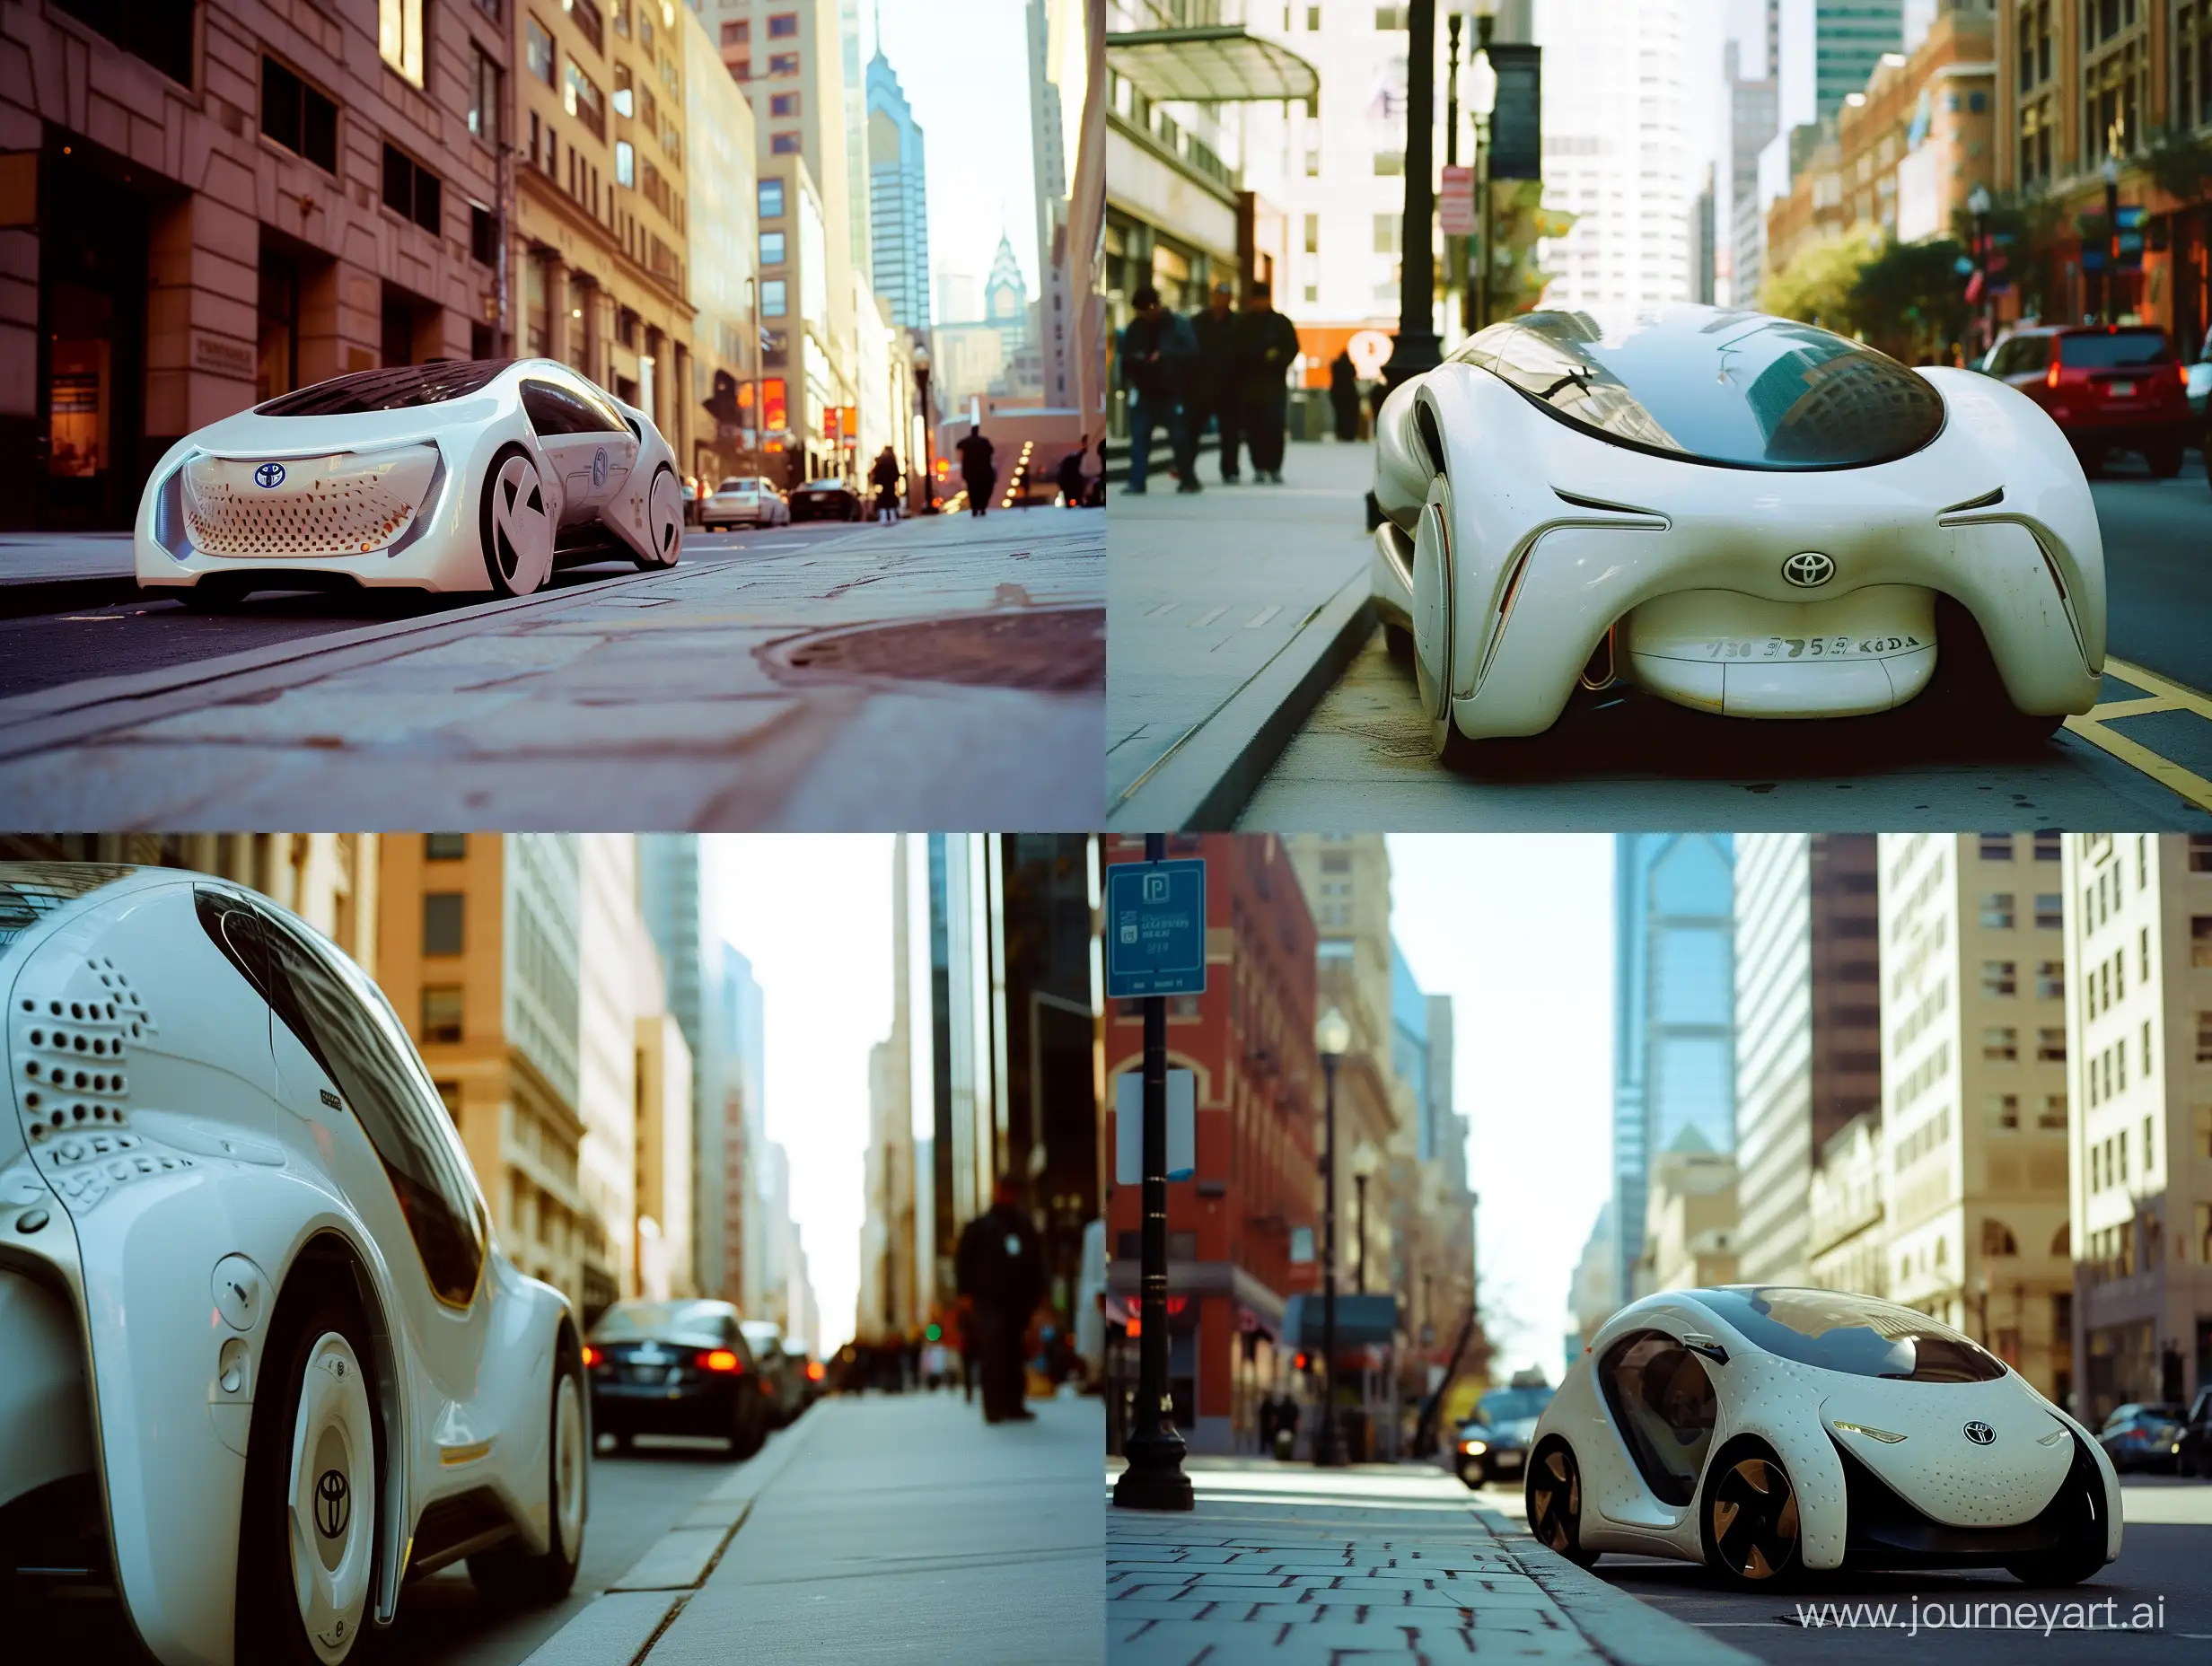 A photo of a white sci-fi electric autonomous Toyota vehicle parked by the sidewalk, captured with Kodak Gold 200 film, showcasing the natural lighting and bustling city environment. The style is raw photo, featuring architectural elements, skyscrapers, and the cityscape of Philadelphia. close up